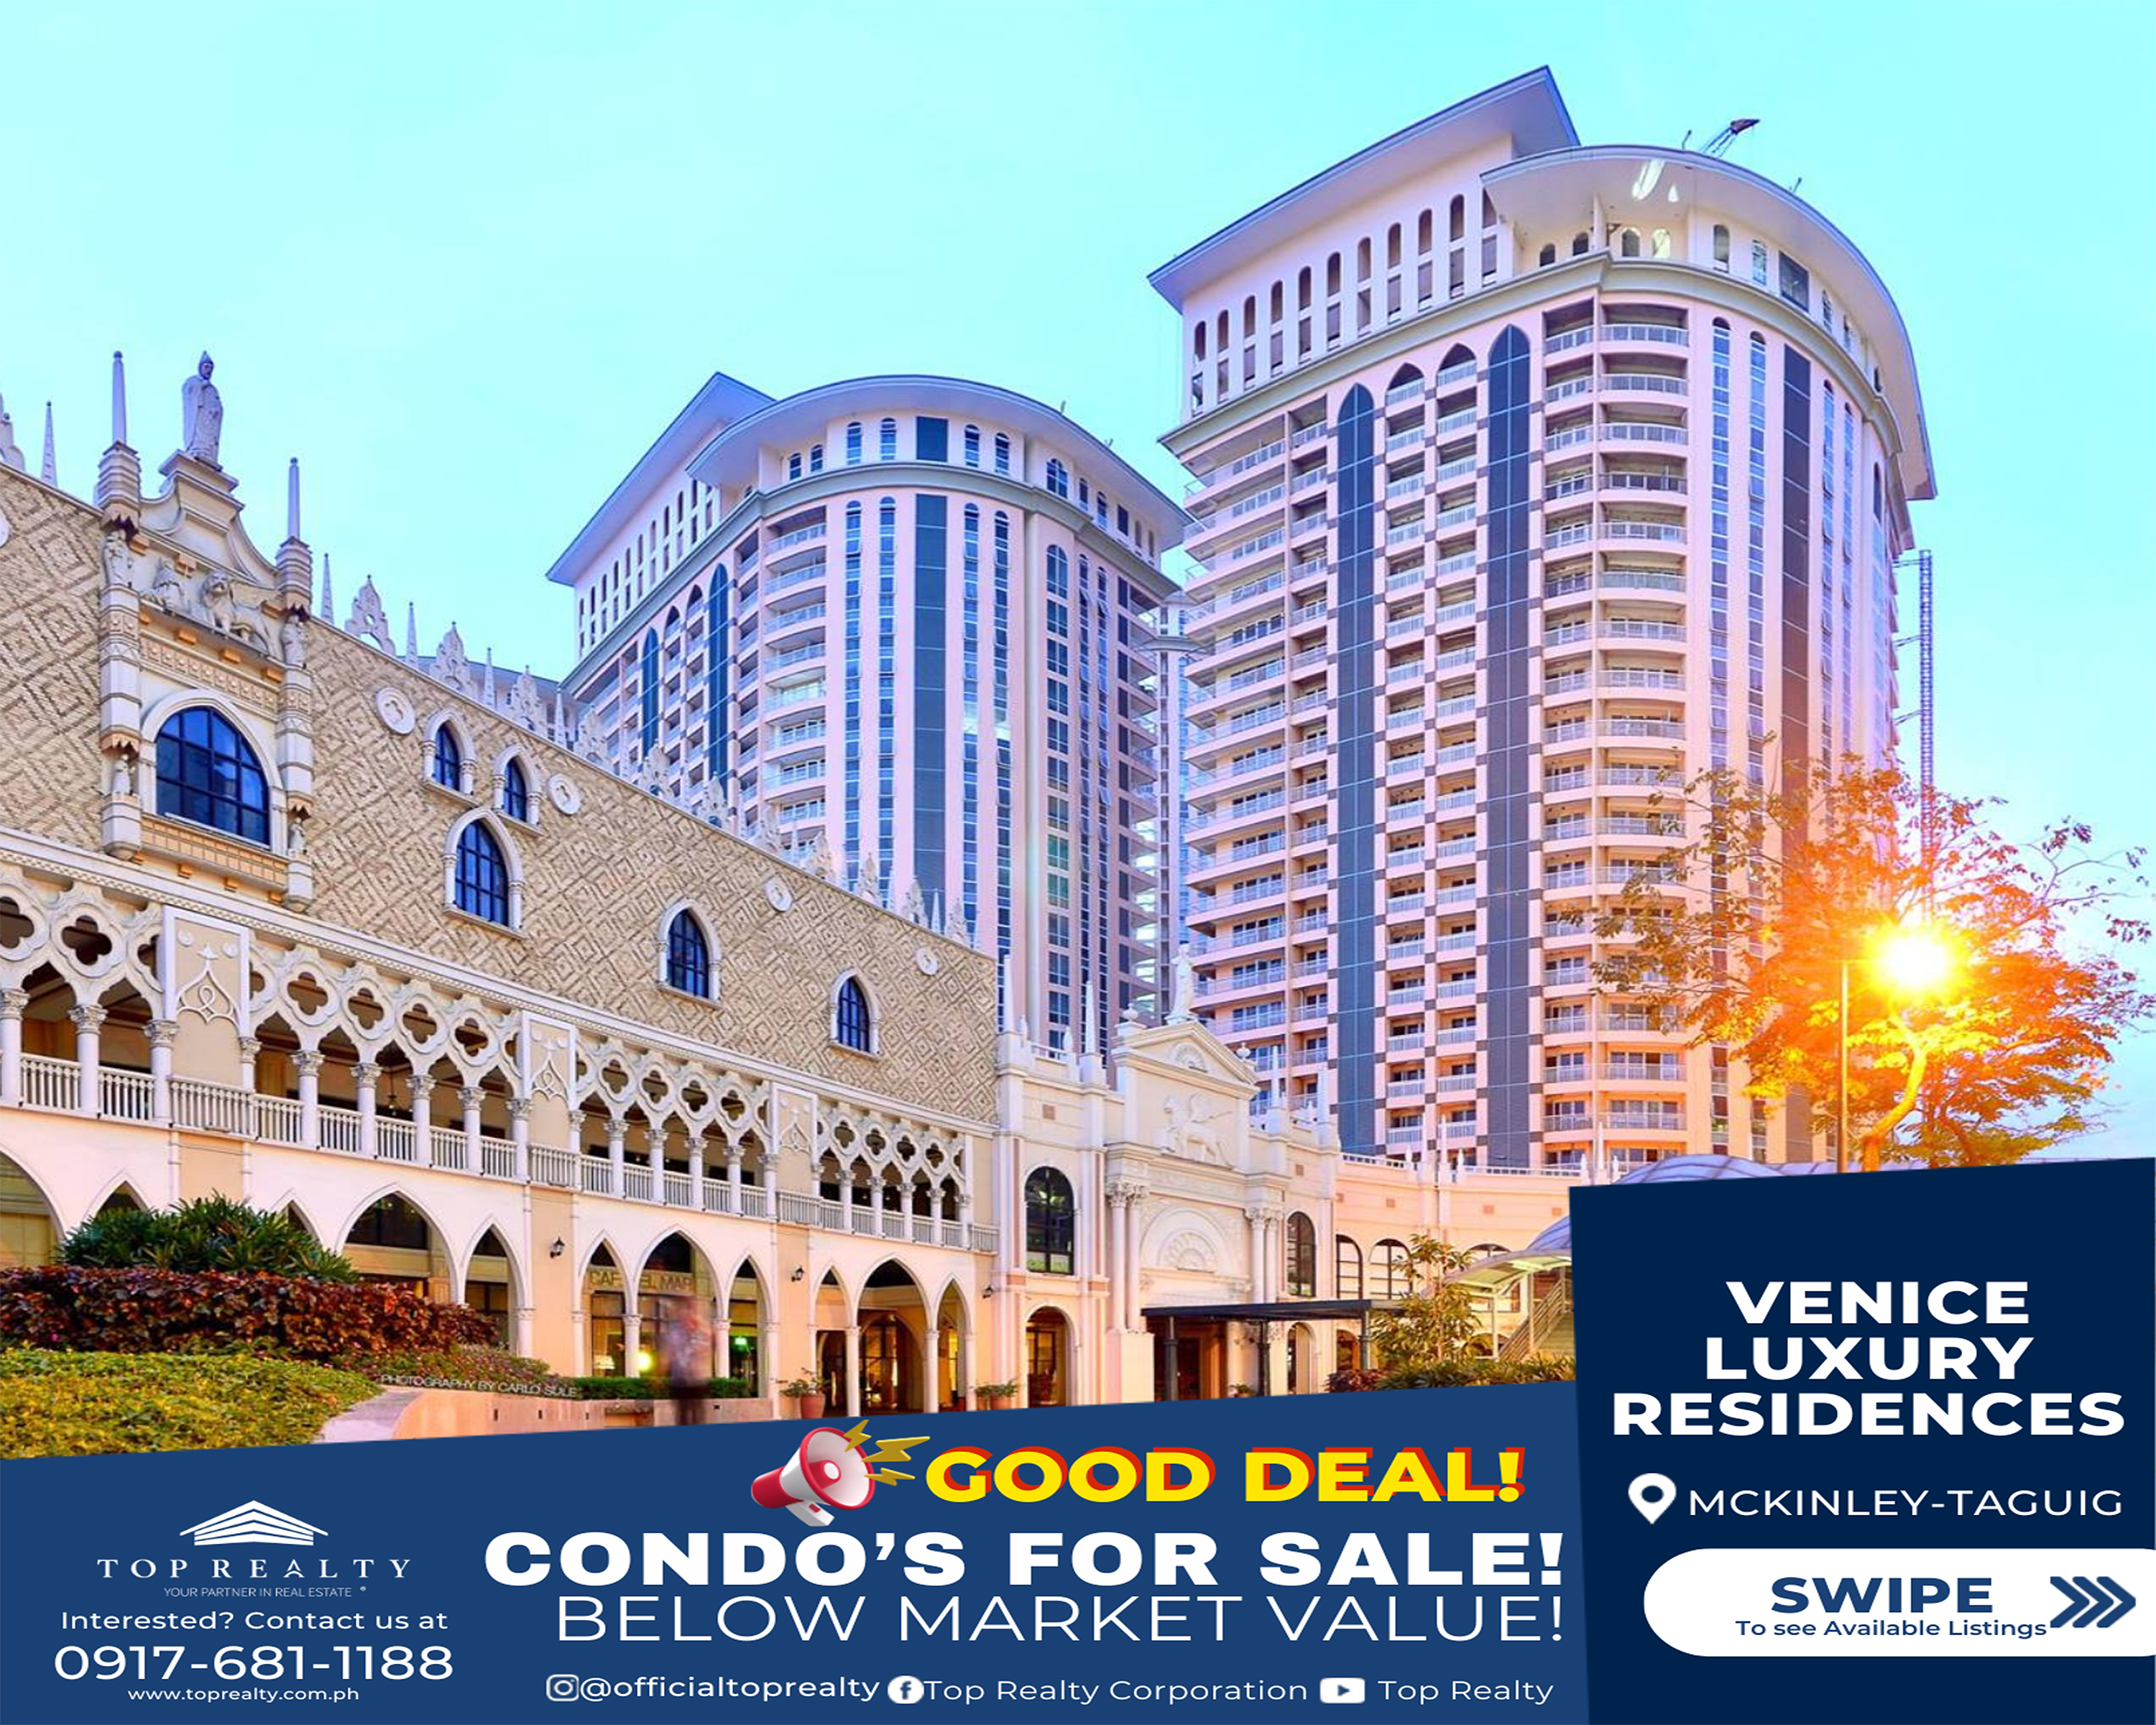 For Sale: Condo in Mckinley Hill, Taguig City at Venice Luxury Residences, 📣BELOW MARKET VALUE! 🔔